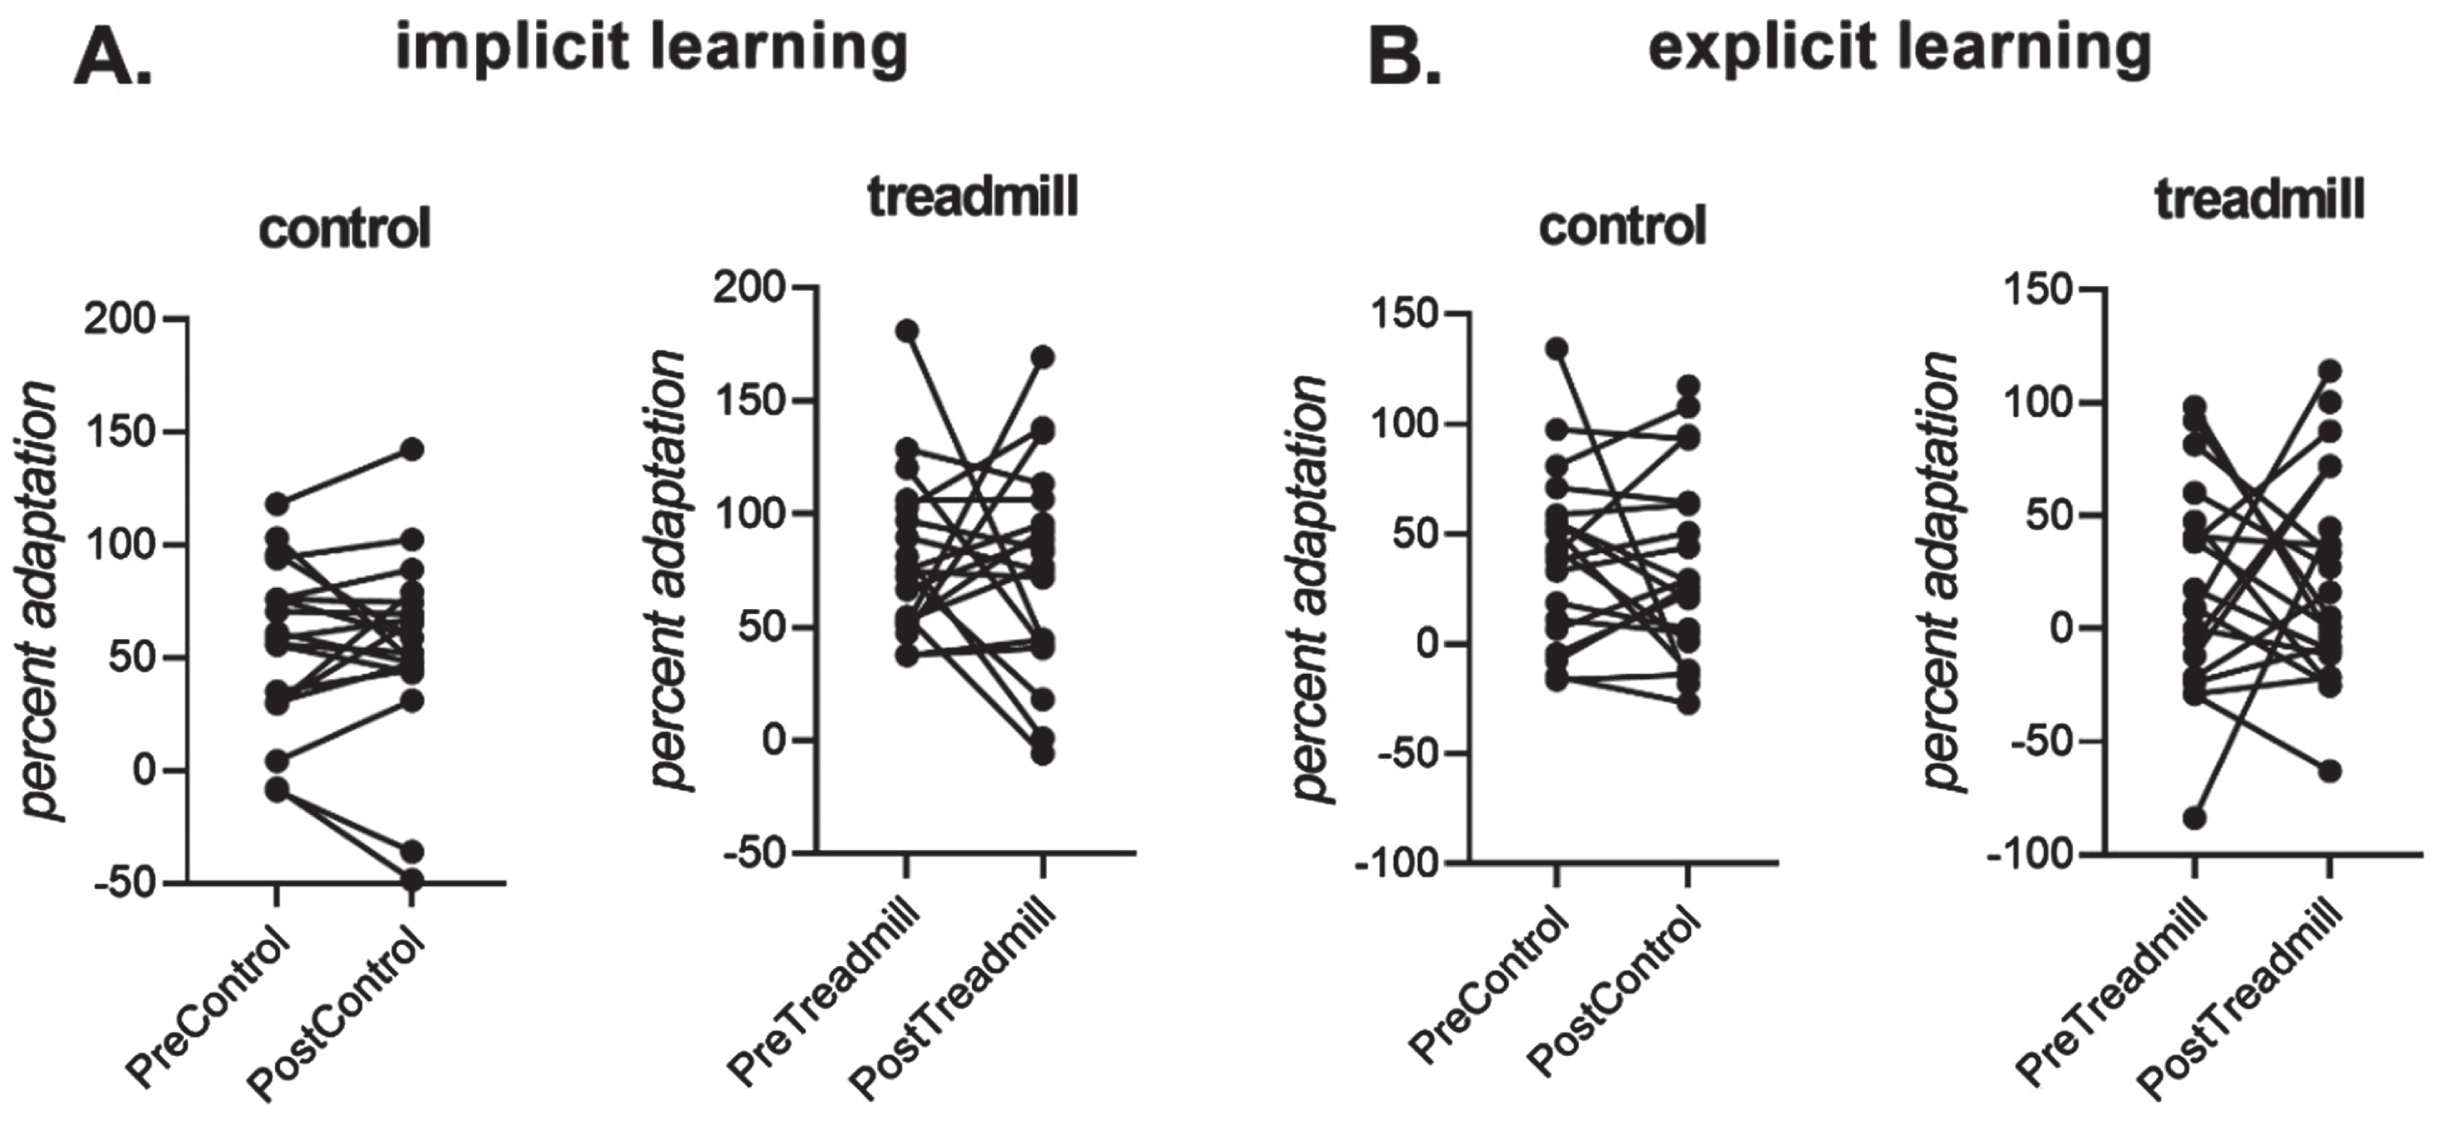 A. Individual participant data for implicit learning, measured as percent adaptation in the first no-feedback cycle (i.e., movements that remained adapted despite being notified that the perturbation had been removed). B. Individual participant data for explicit learning, measured as the change in percent adaptation upon notification of the perturbation removal). Implicit and explicit learning did not differ significantly from pre- to post-control and/or pre-to-post intervention.